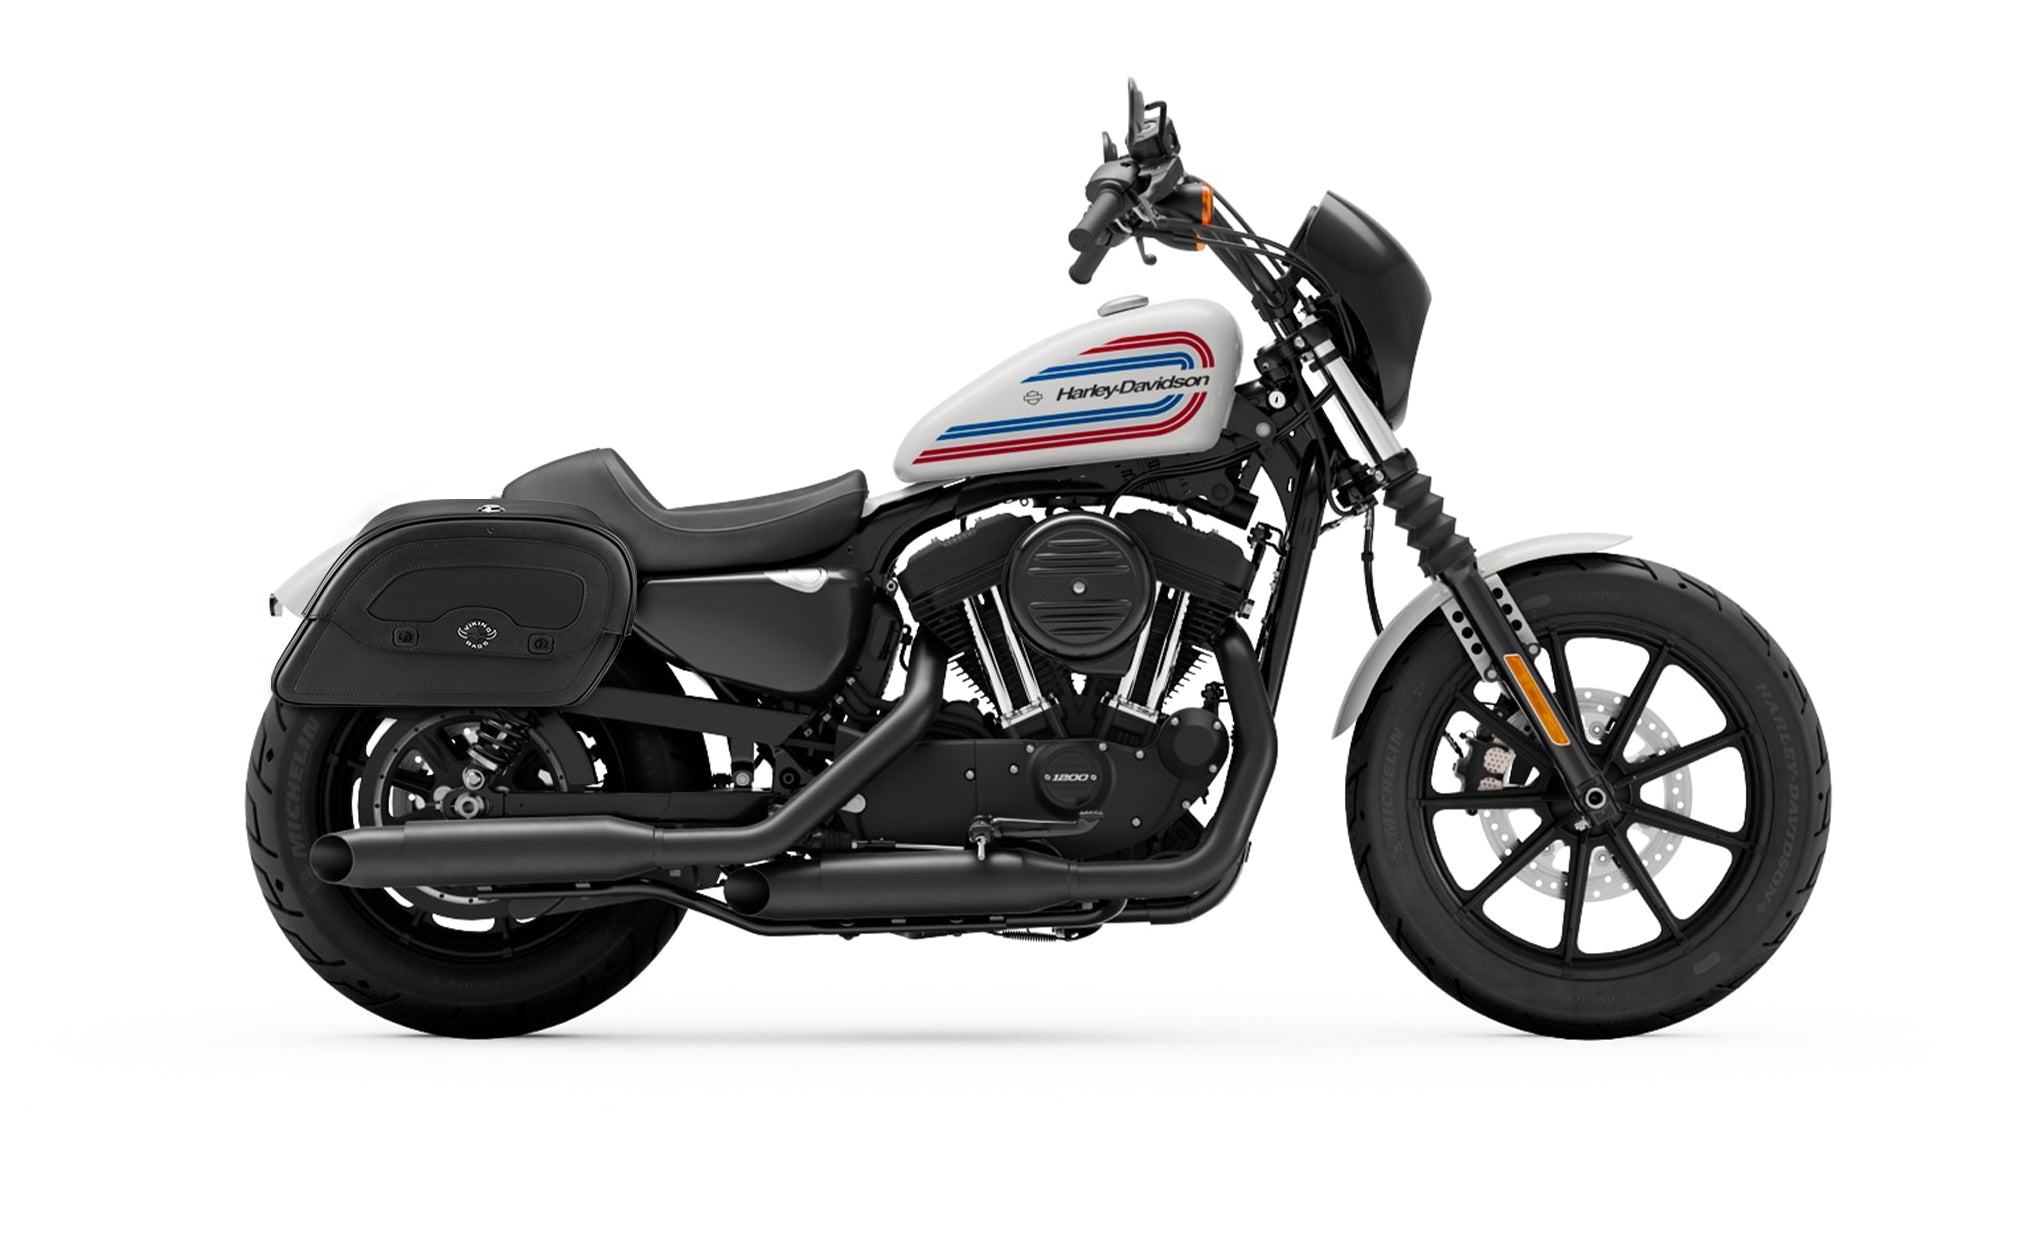 22L - Warrior Medium Quick-Mount Motorcycle Saddlebags For Harley Sportster Iron 1200 @expand